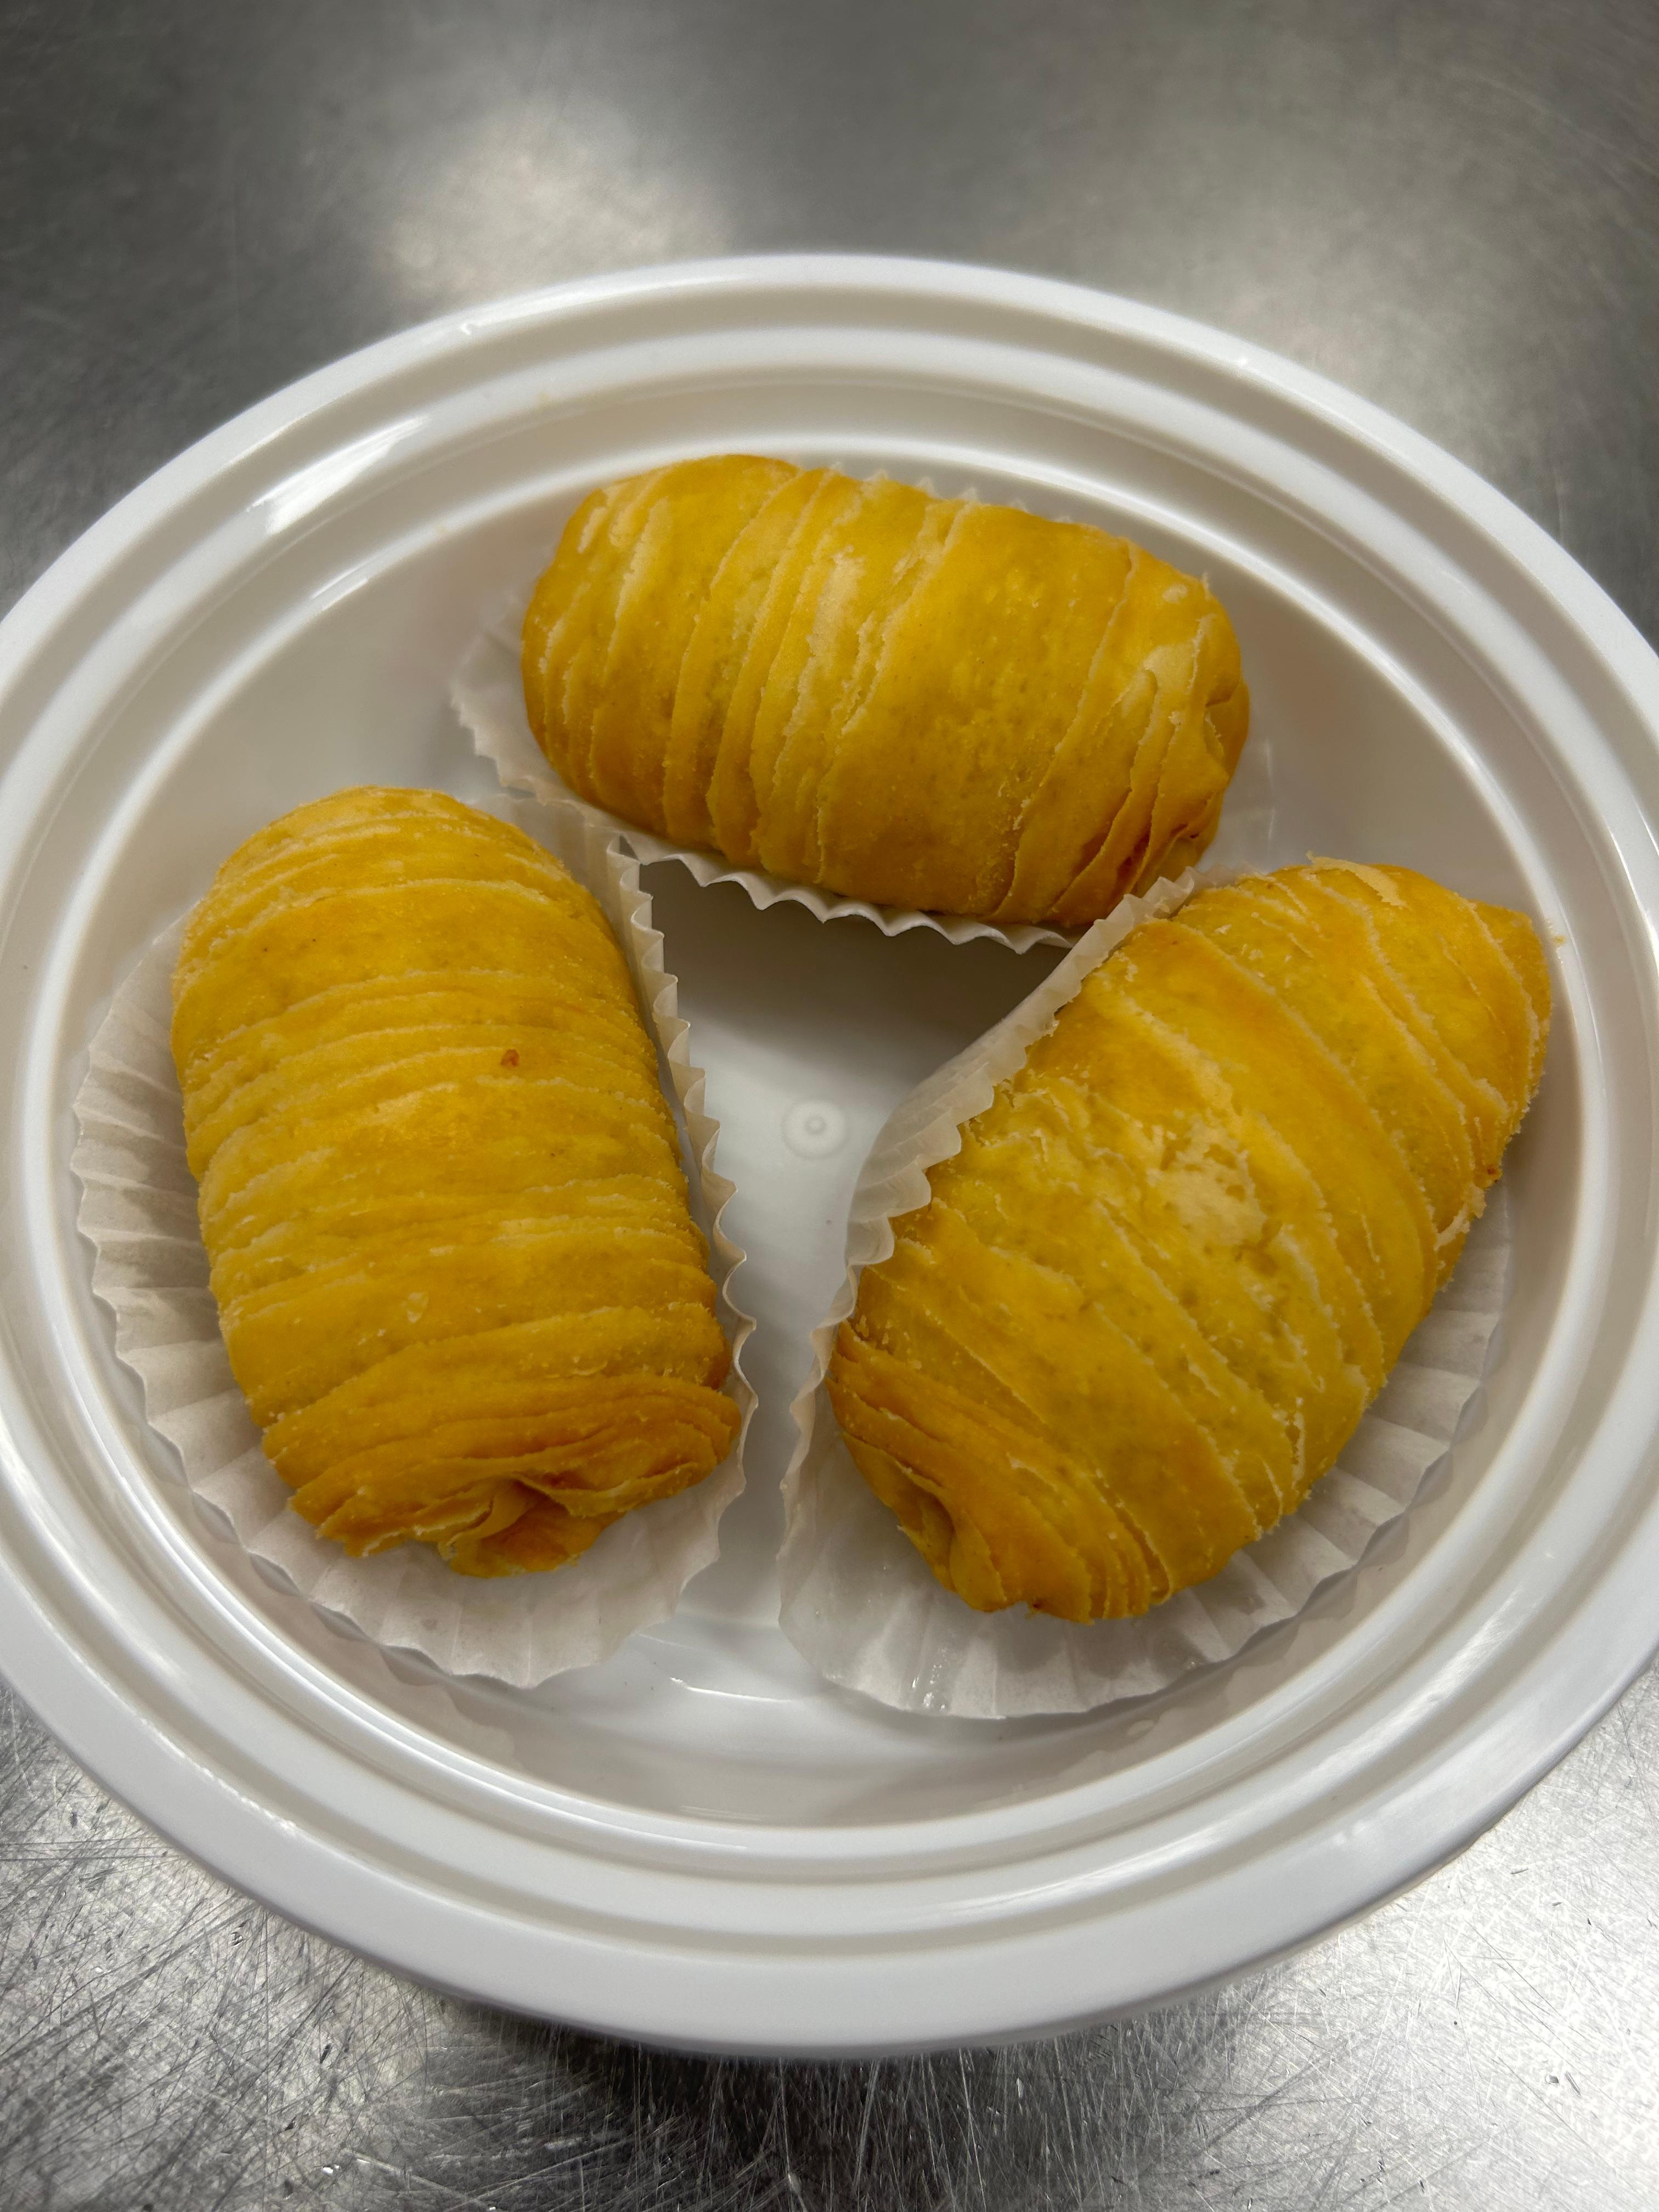 49. Durian Puff Pastries 榴梿酥